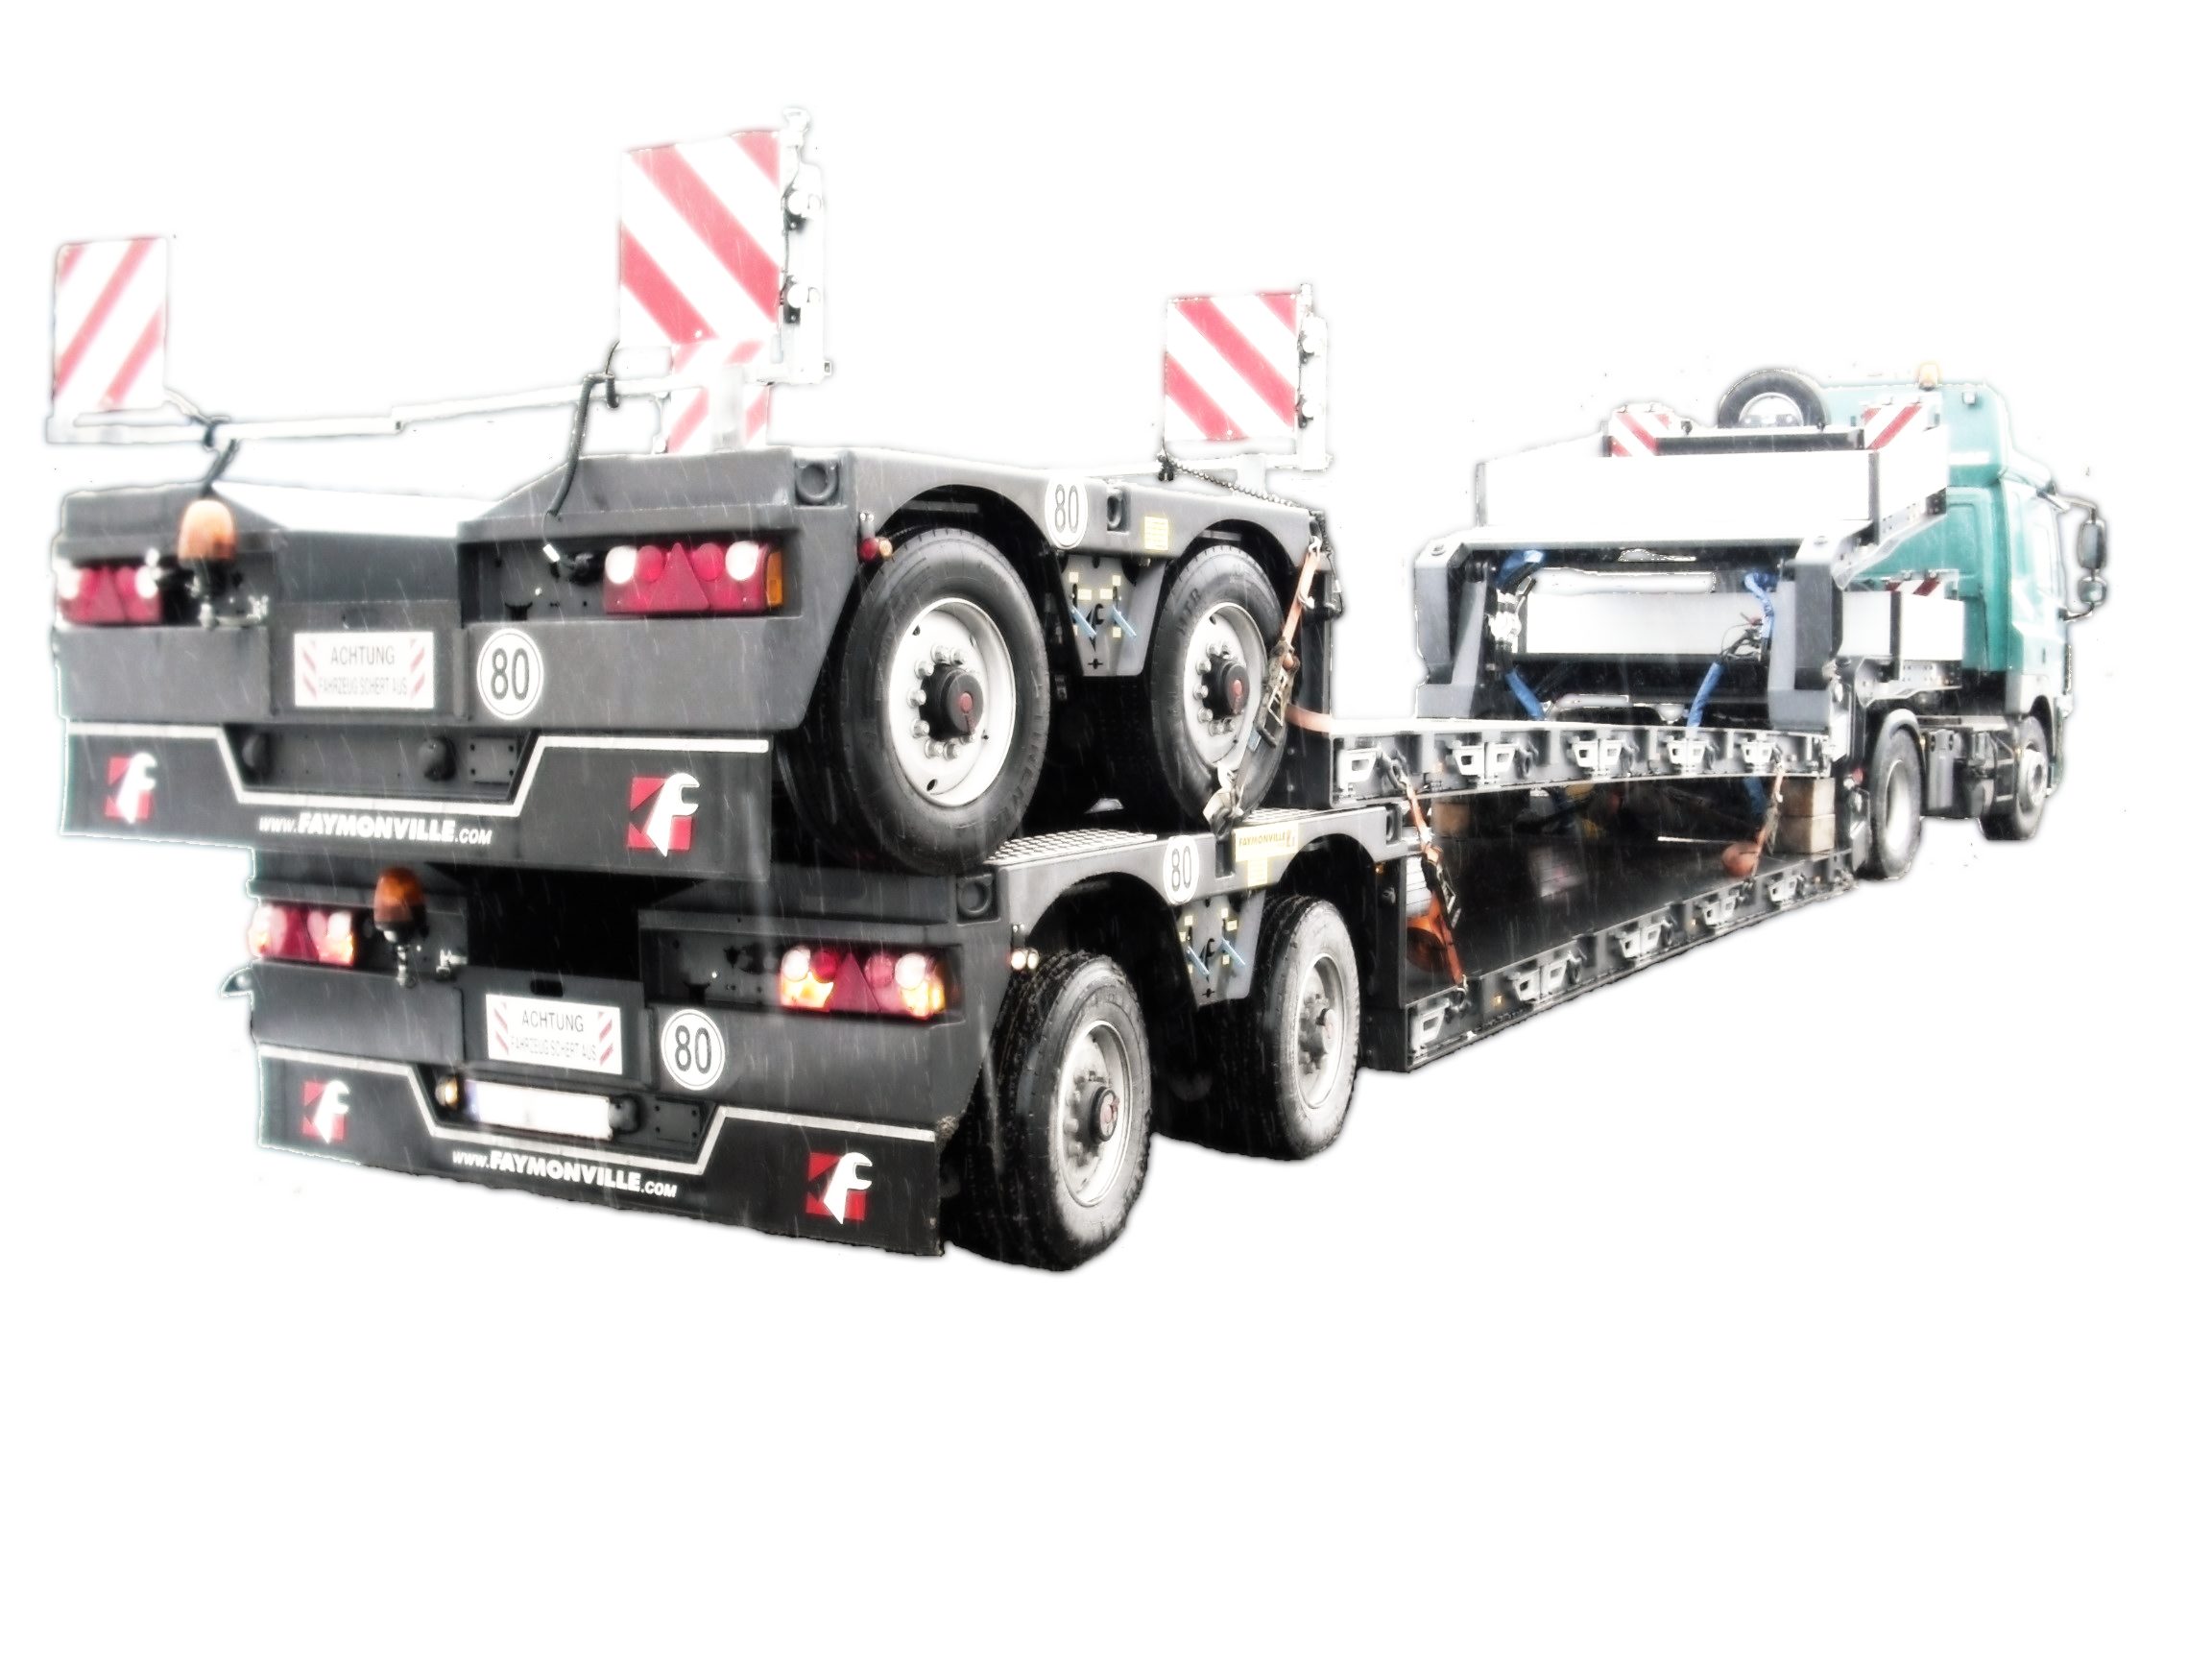 Start with heavy trailer vehicles